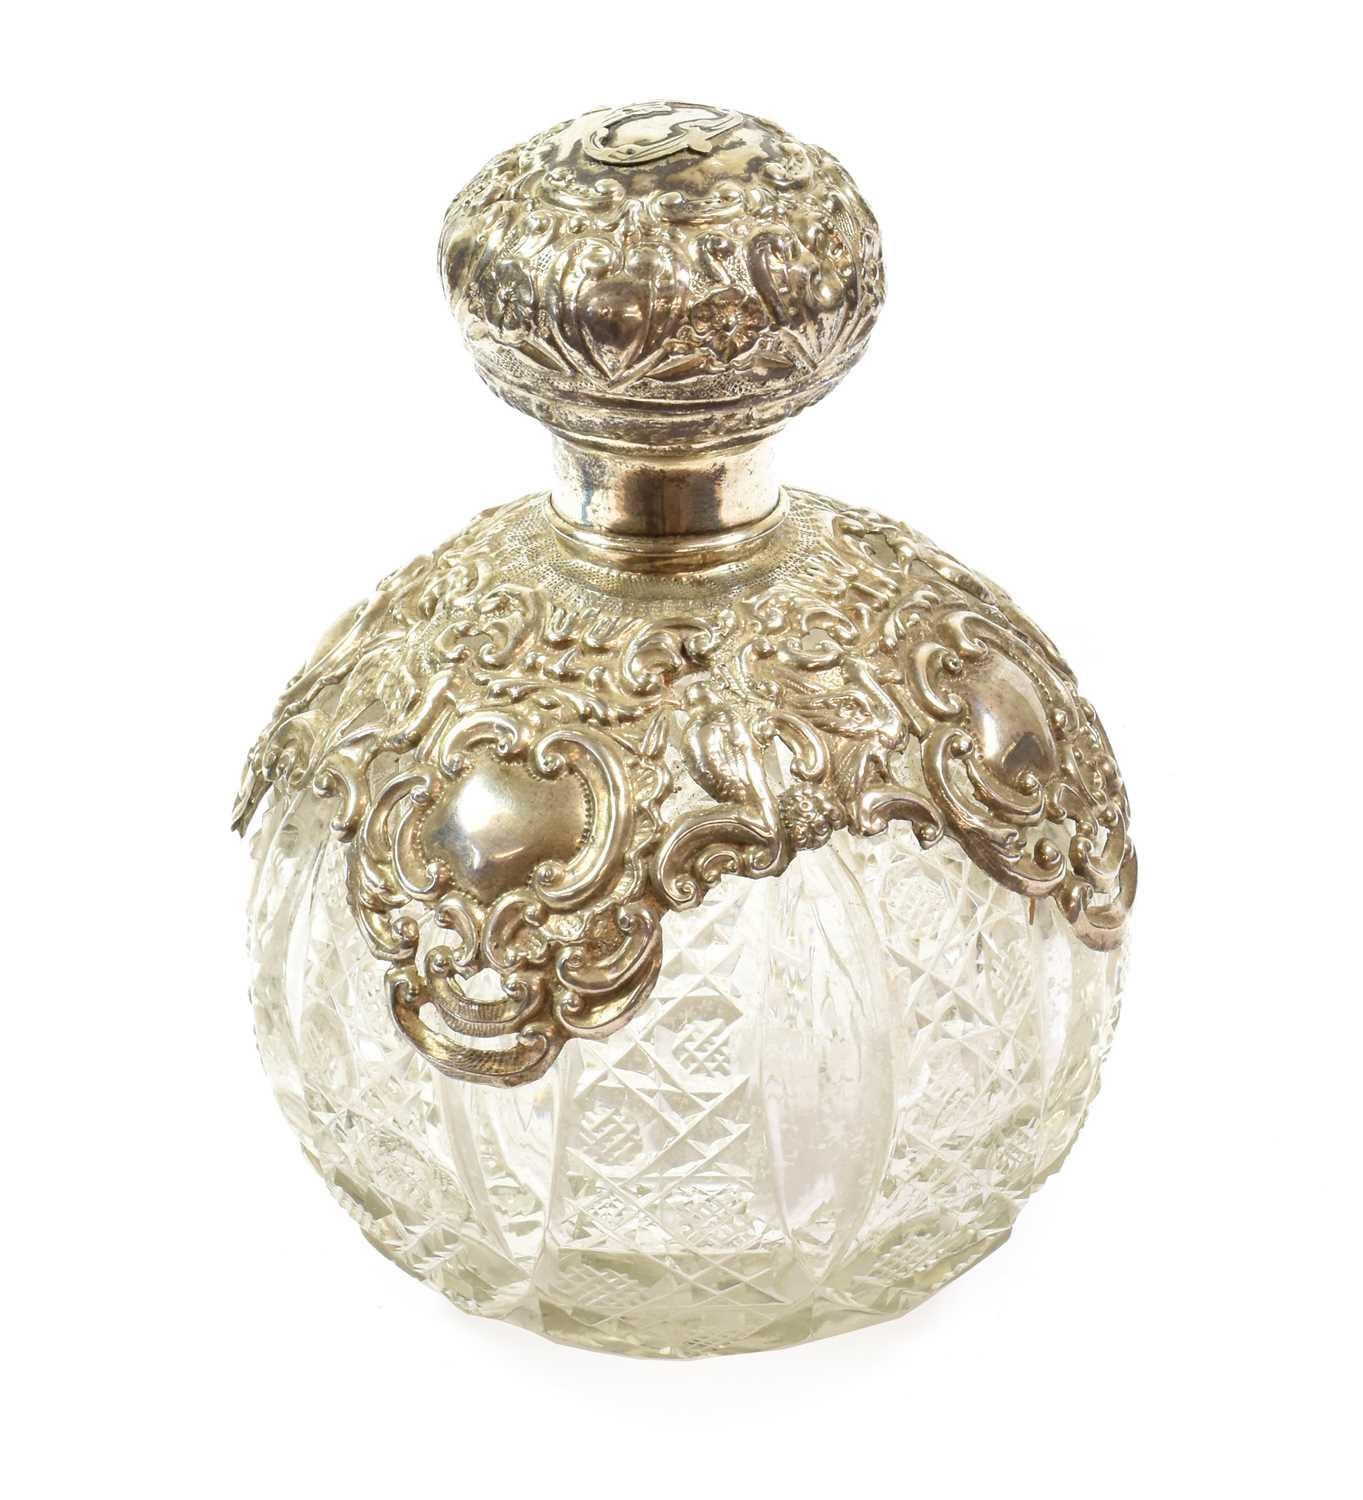 Extraordinary Rare Silver Metal Mounted Cut Glass Scent Bottle on a Victorian Silver Stand by George Edward & Sons

An impressive representation of finer living during the Edwardian or Victorian era with silver metal-mounted cut glass embellishments